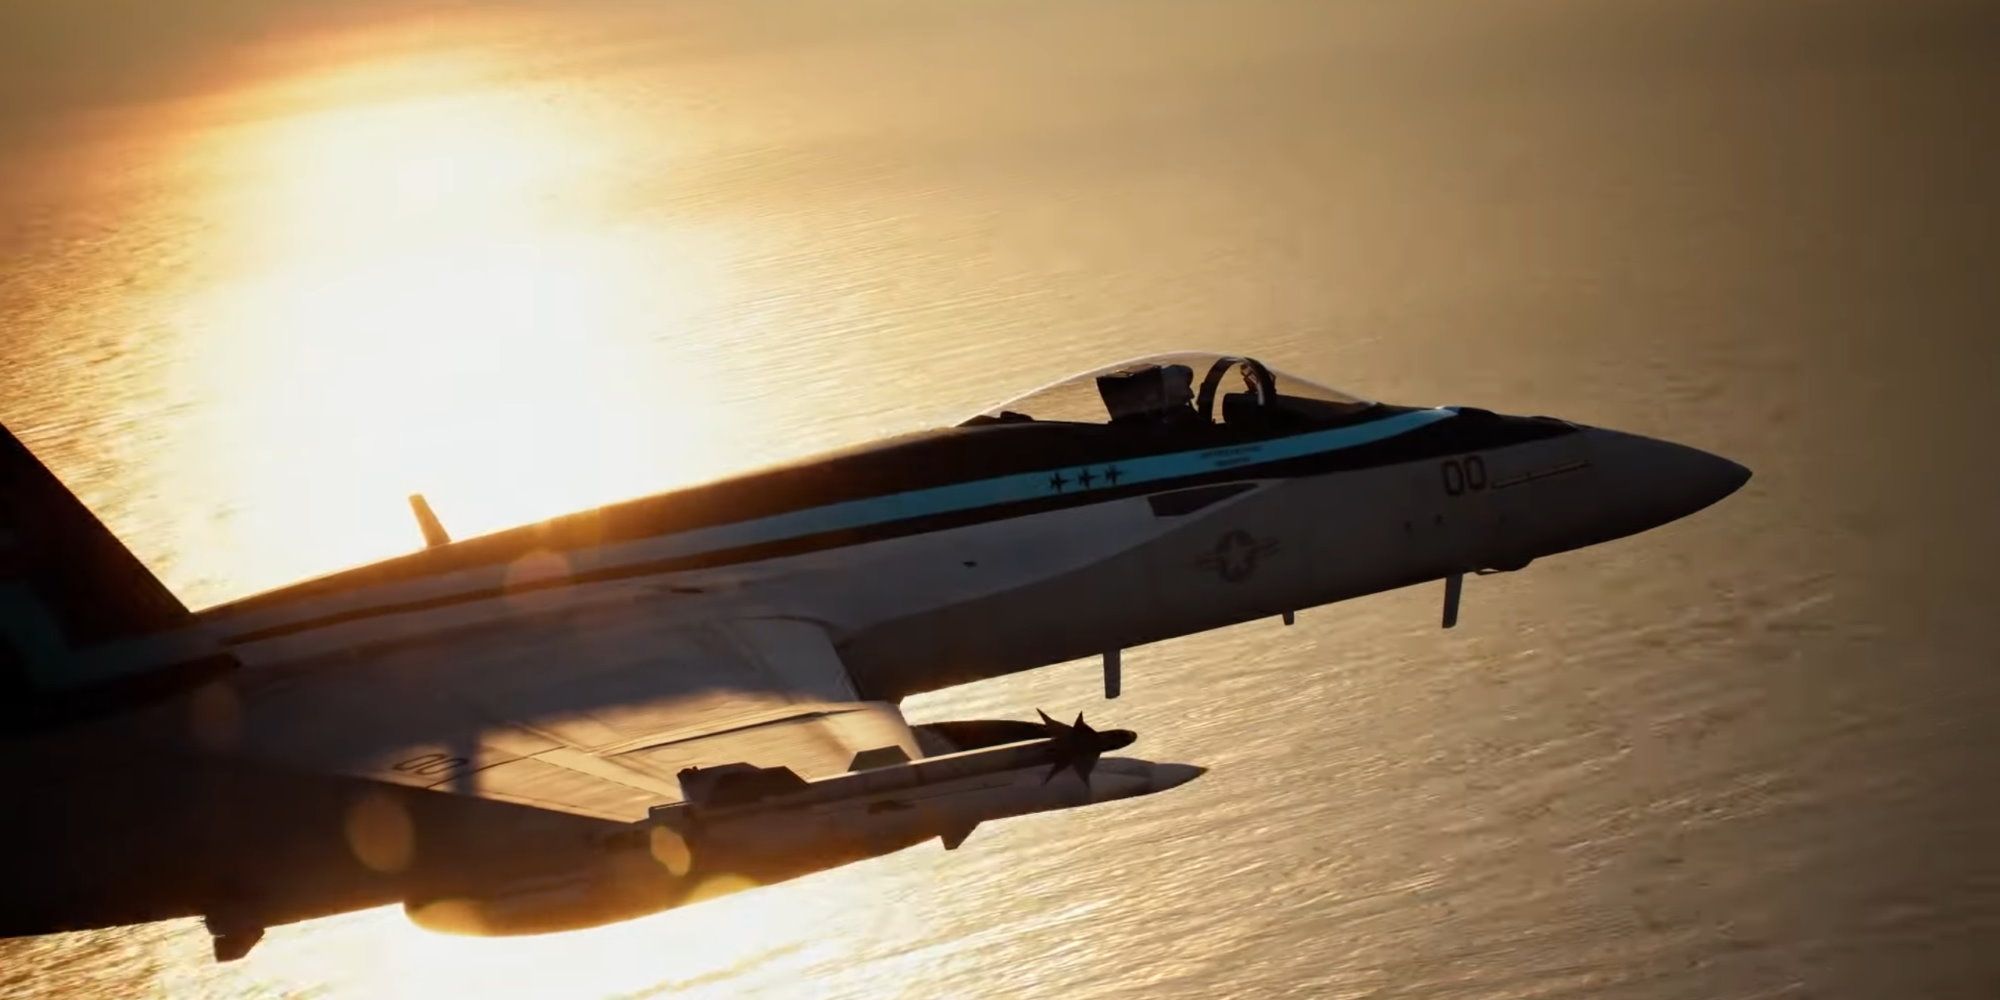 You can fly the Darkstar and other planes from Top Gun: Maverick